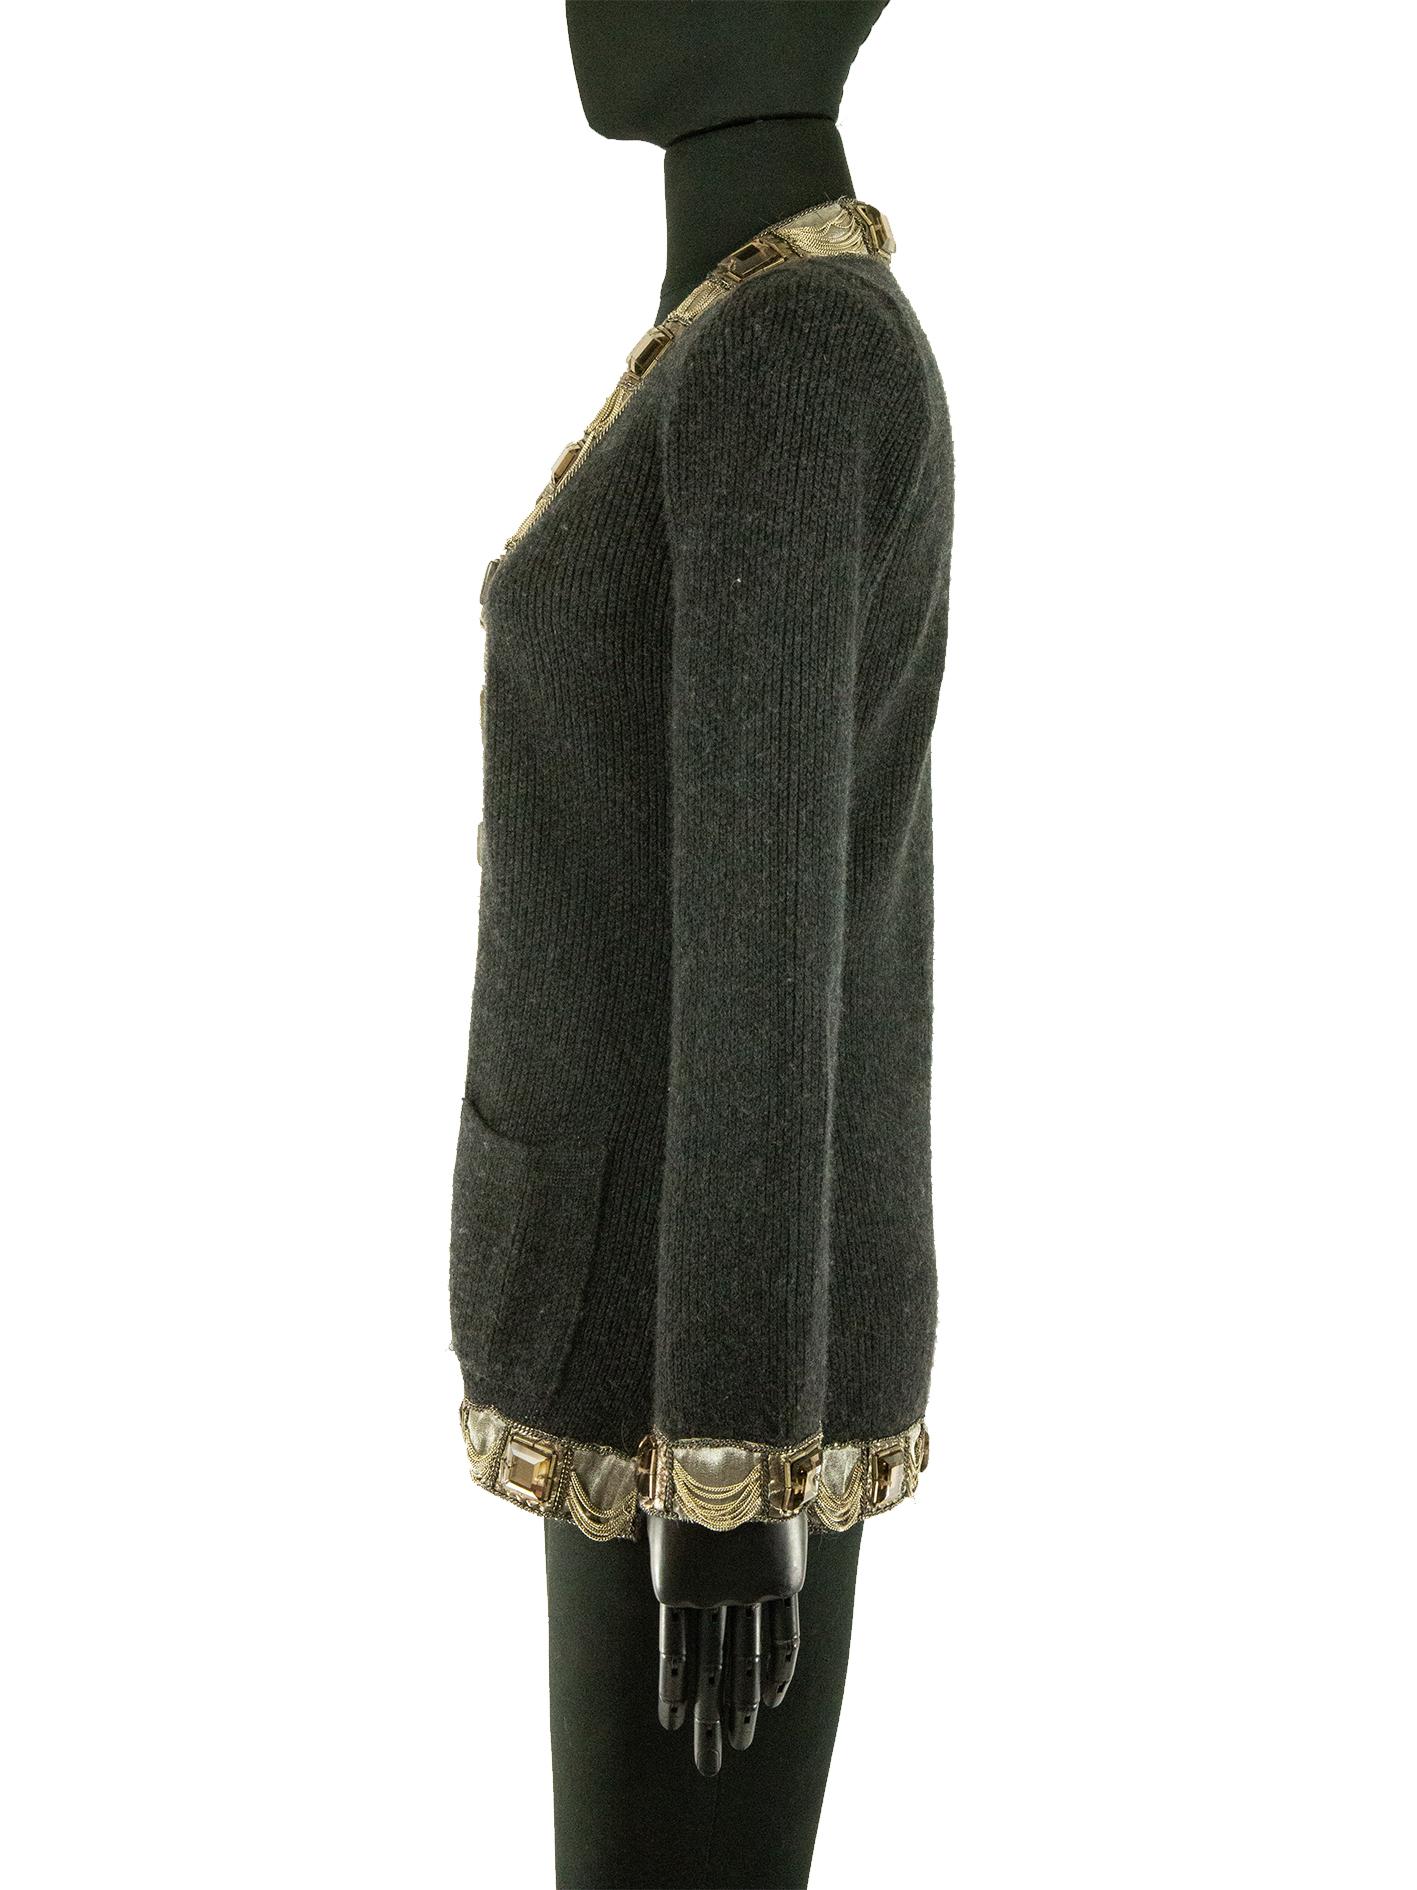 A deep grey long cashmere cardigan by Oscar De La Renta. This cardigan features unique embroidery throughout. Wrapping around the hem, through to the front of the cardigan and finally around the collar and separately around the cuffs; there’s